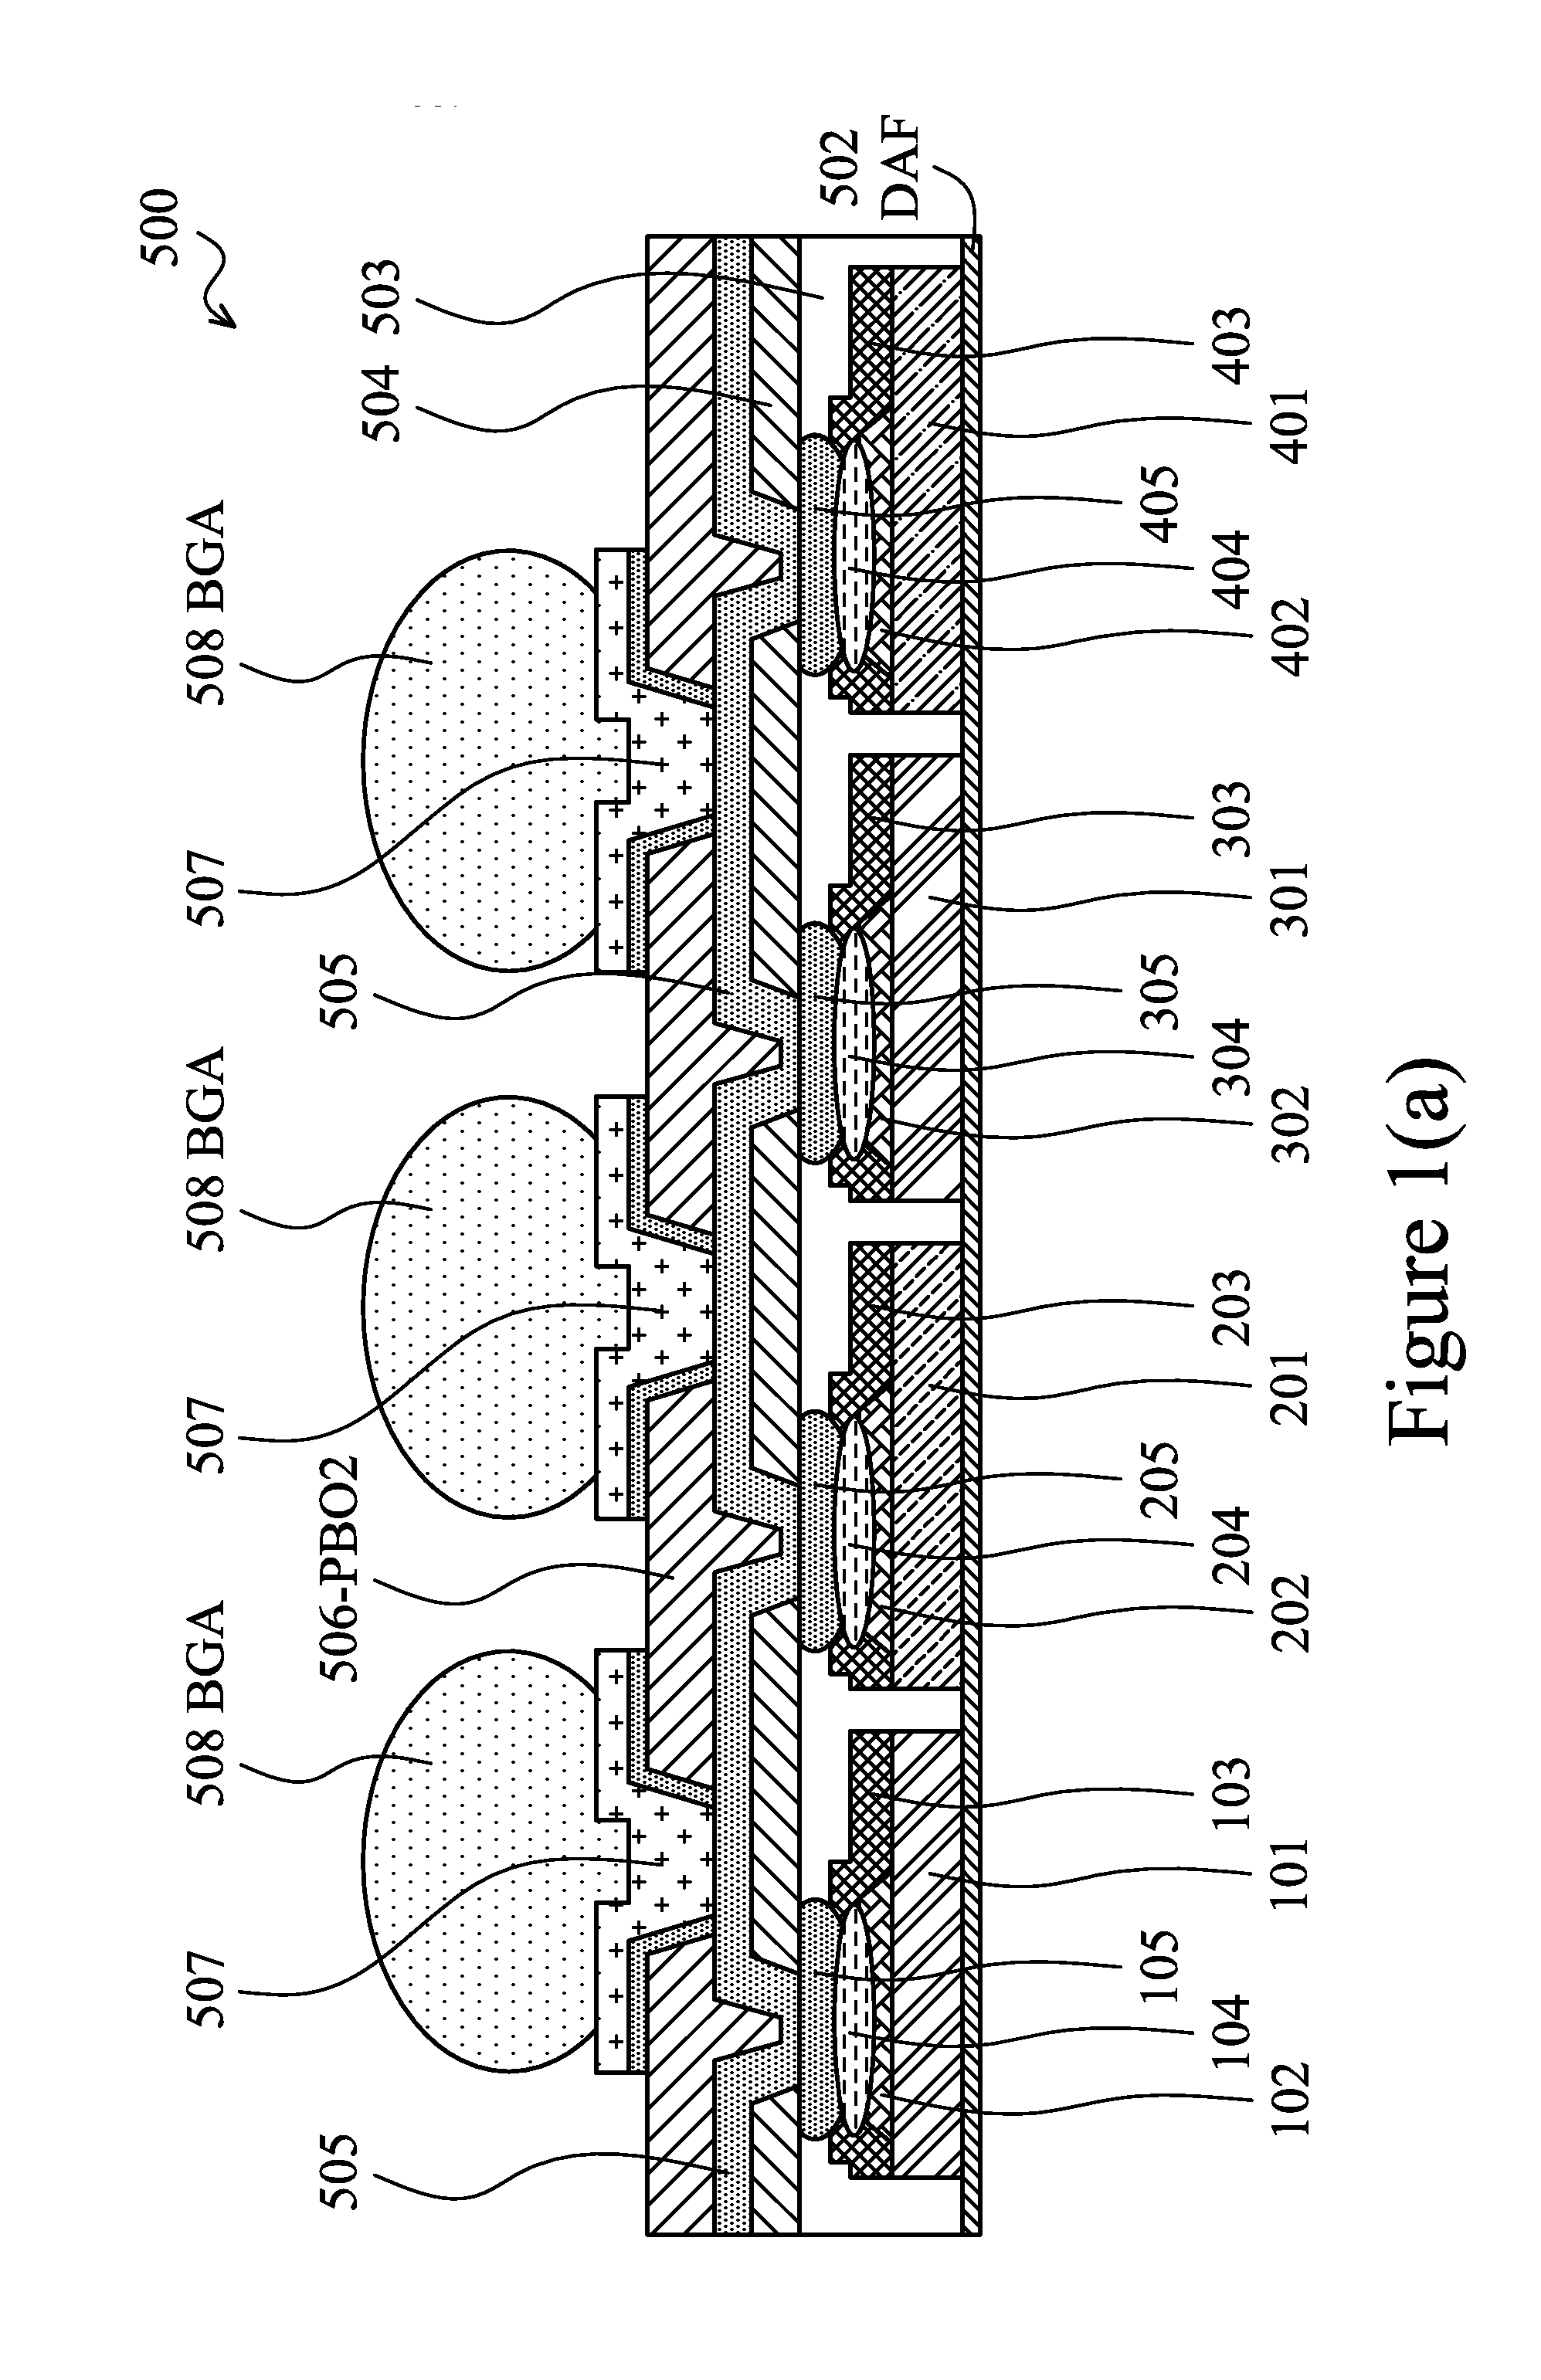 Methods and Apparatus of Wafer Level Package for Heterogeneous Integration Technology